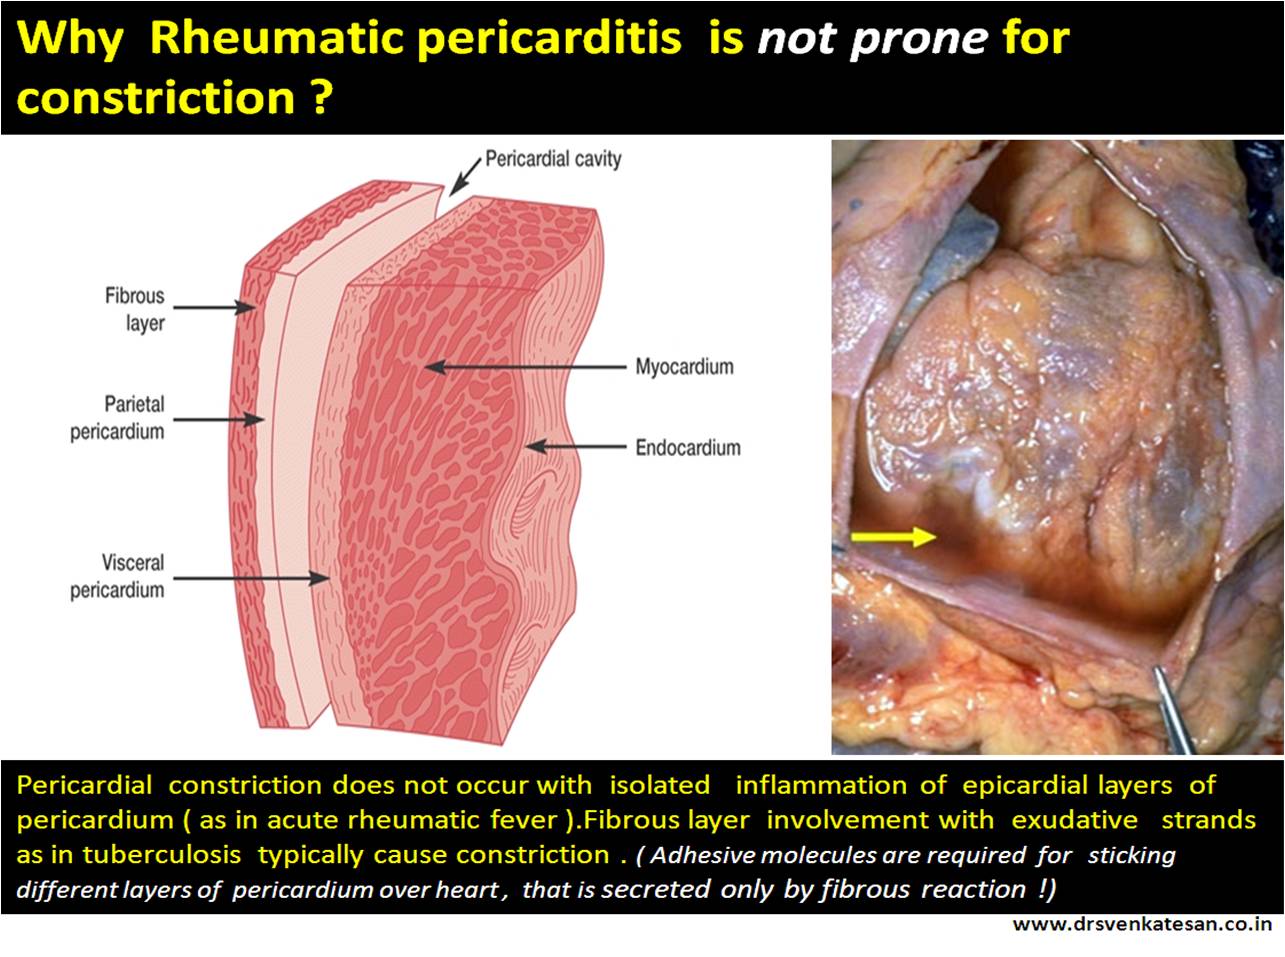 why rheumatic pericarditis does not go for constriction